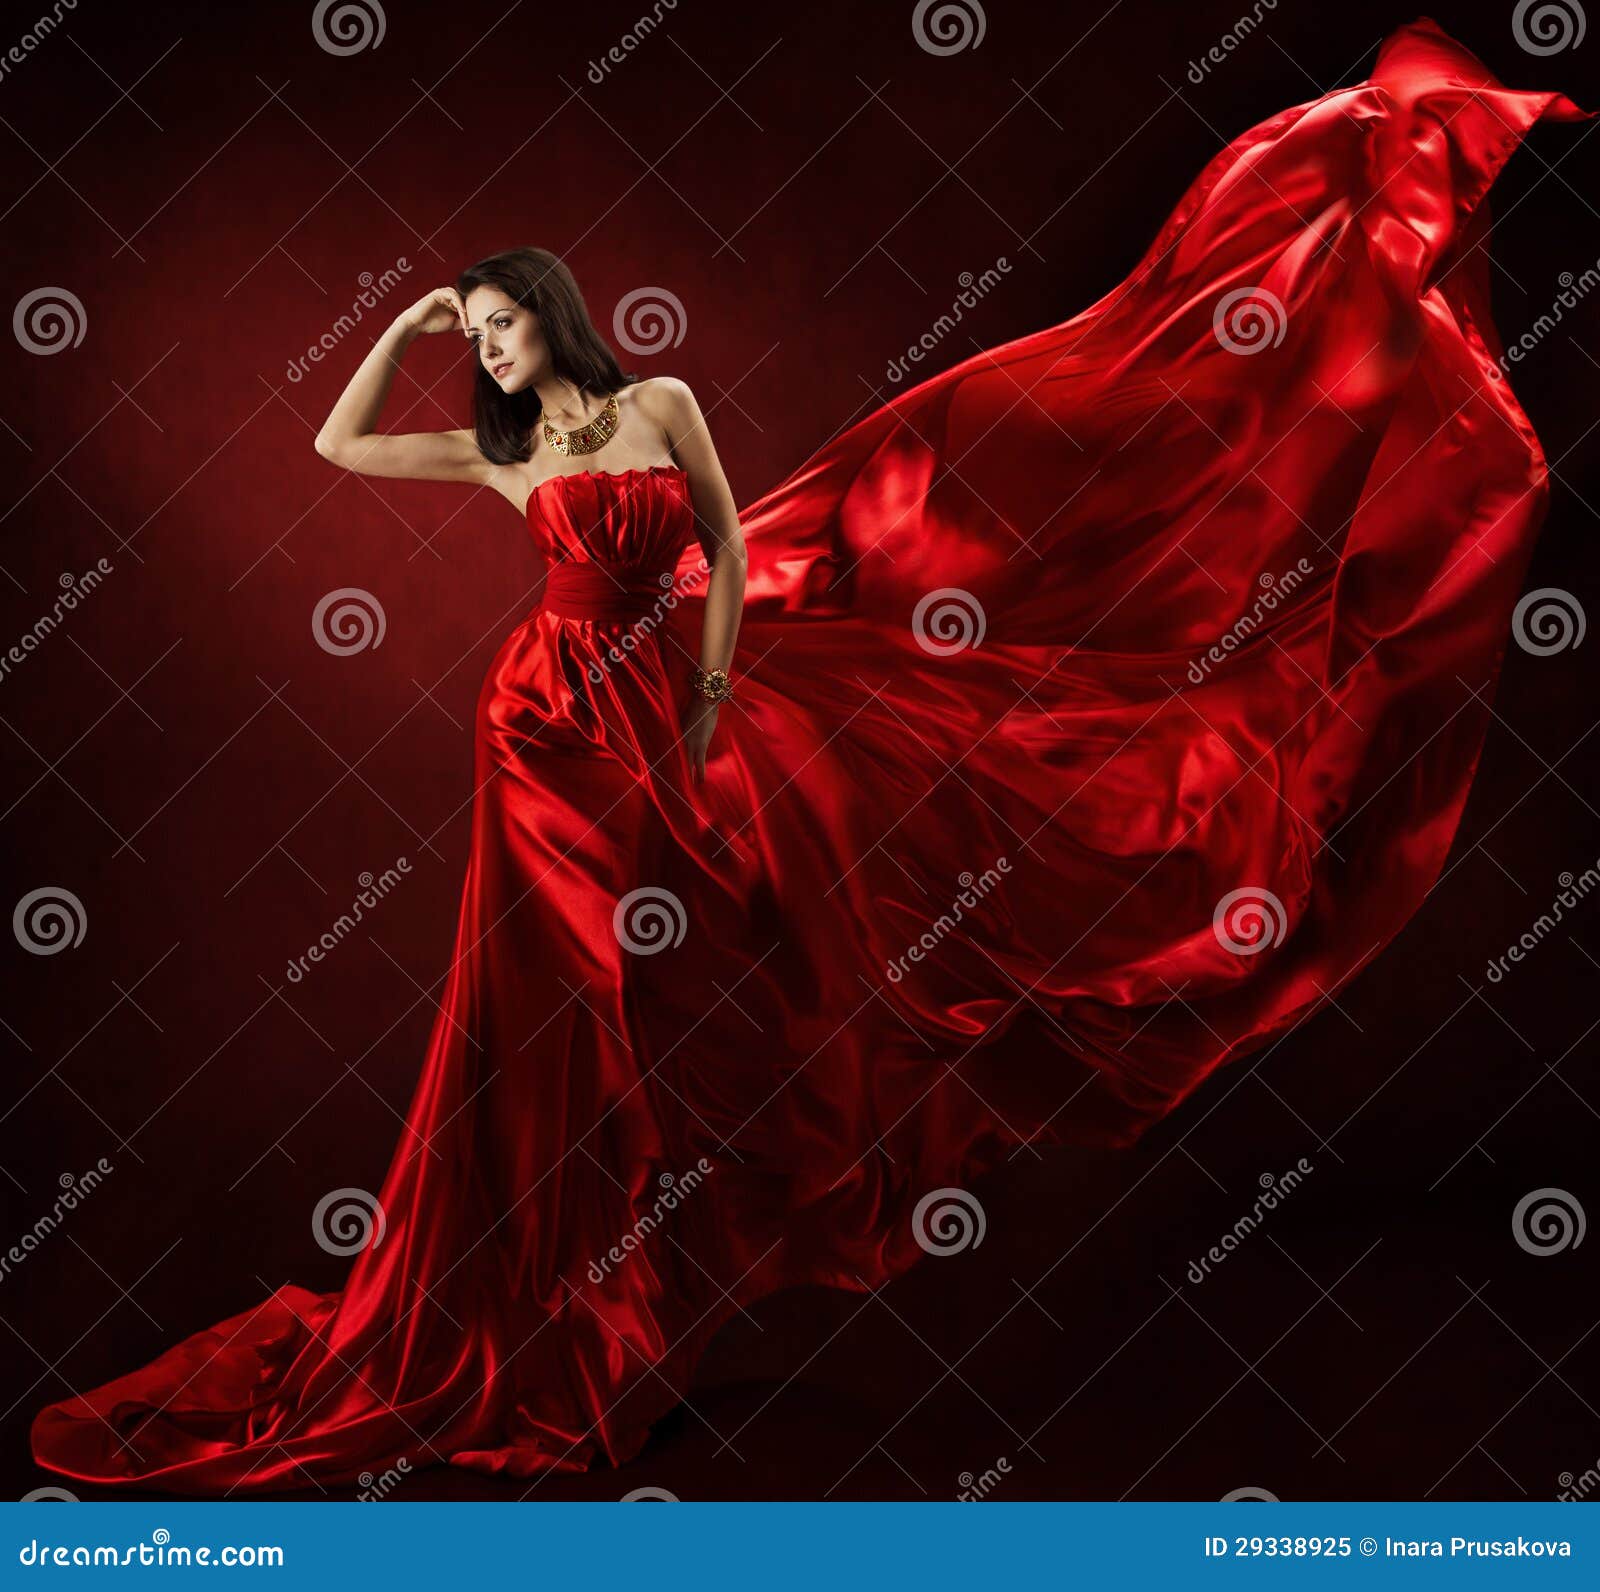 woman in red waving dress with flying fabric